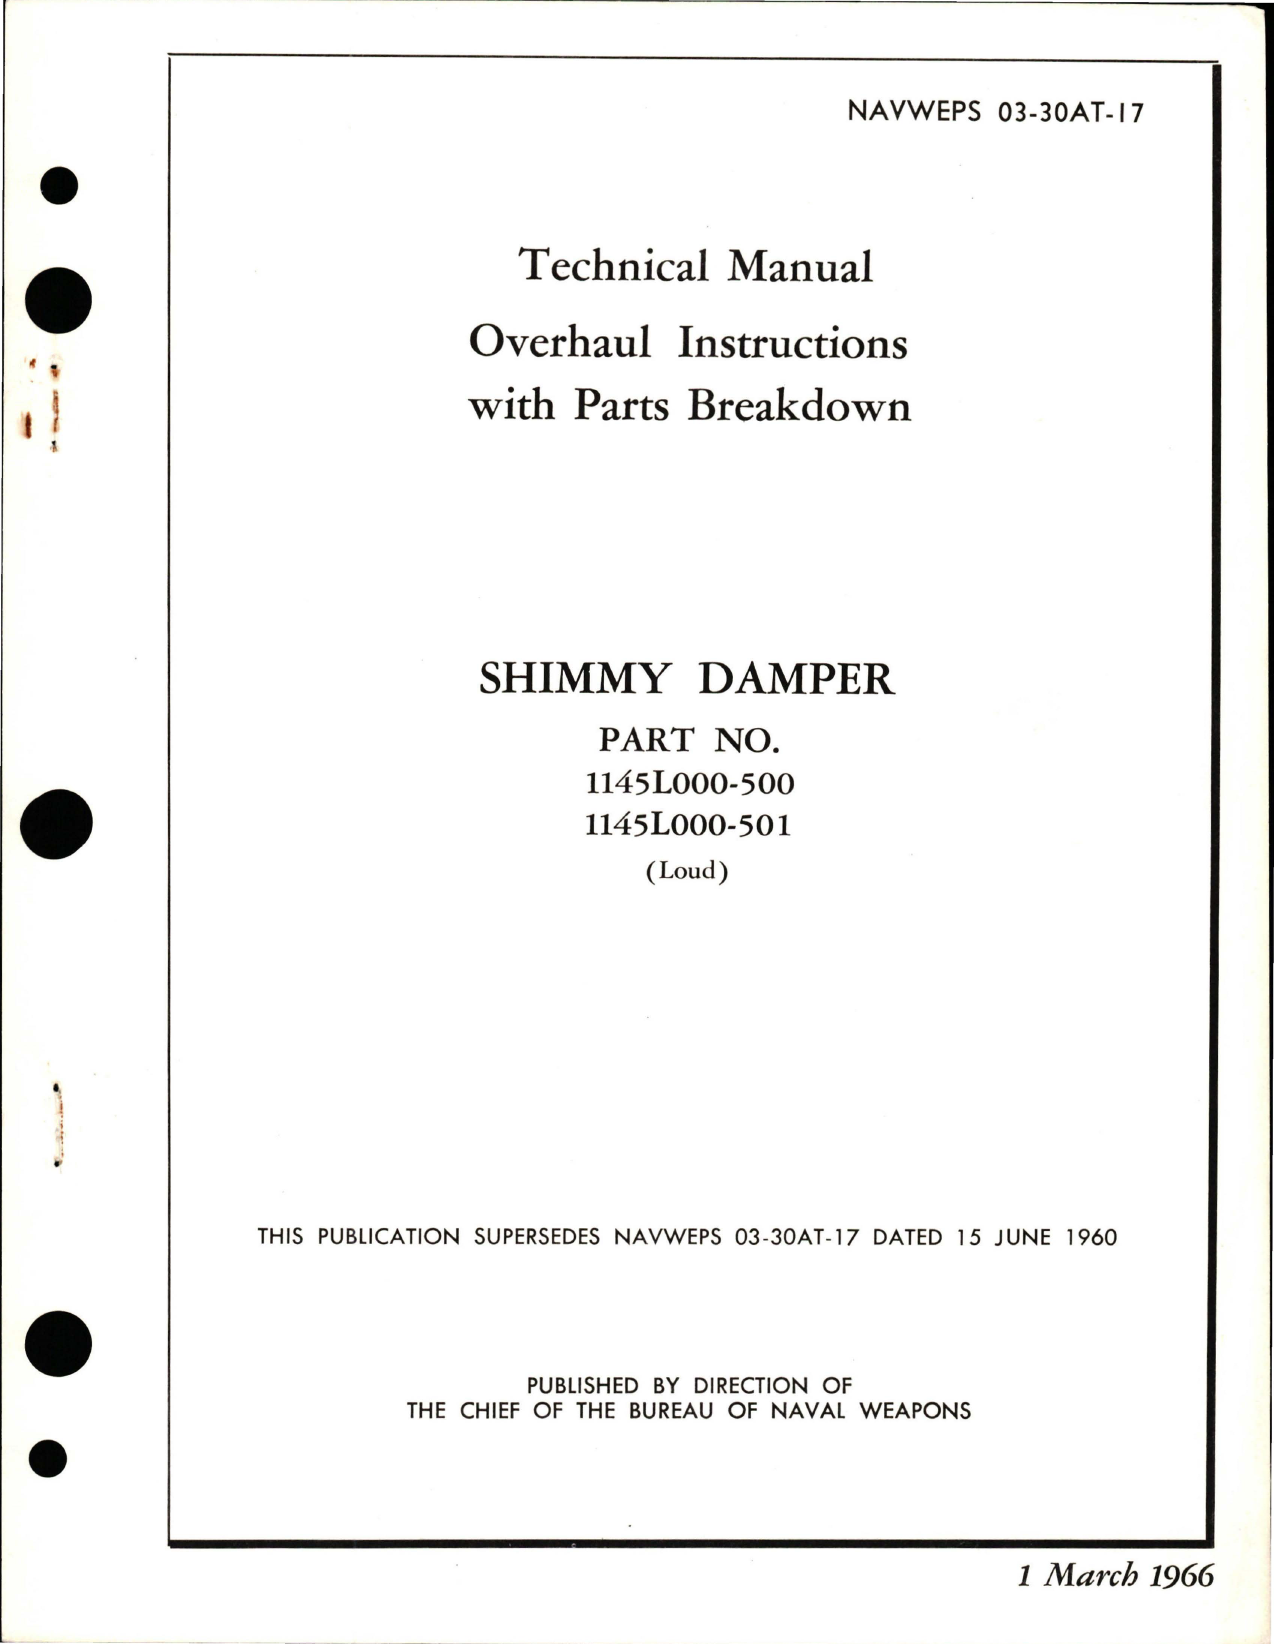 Sample page 1 from AirCorps Library document: Overhaul Instructions with Parts Breakdown for Shimmy Damper - Parts 1145L000-500 and 1145L000-501 